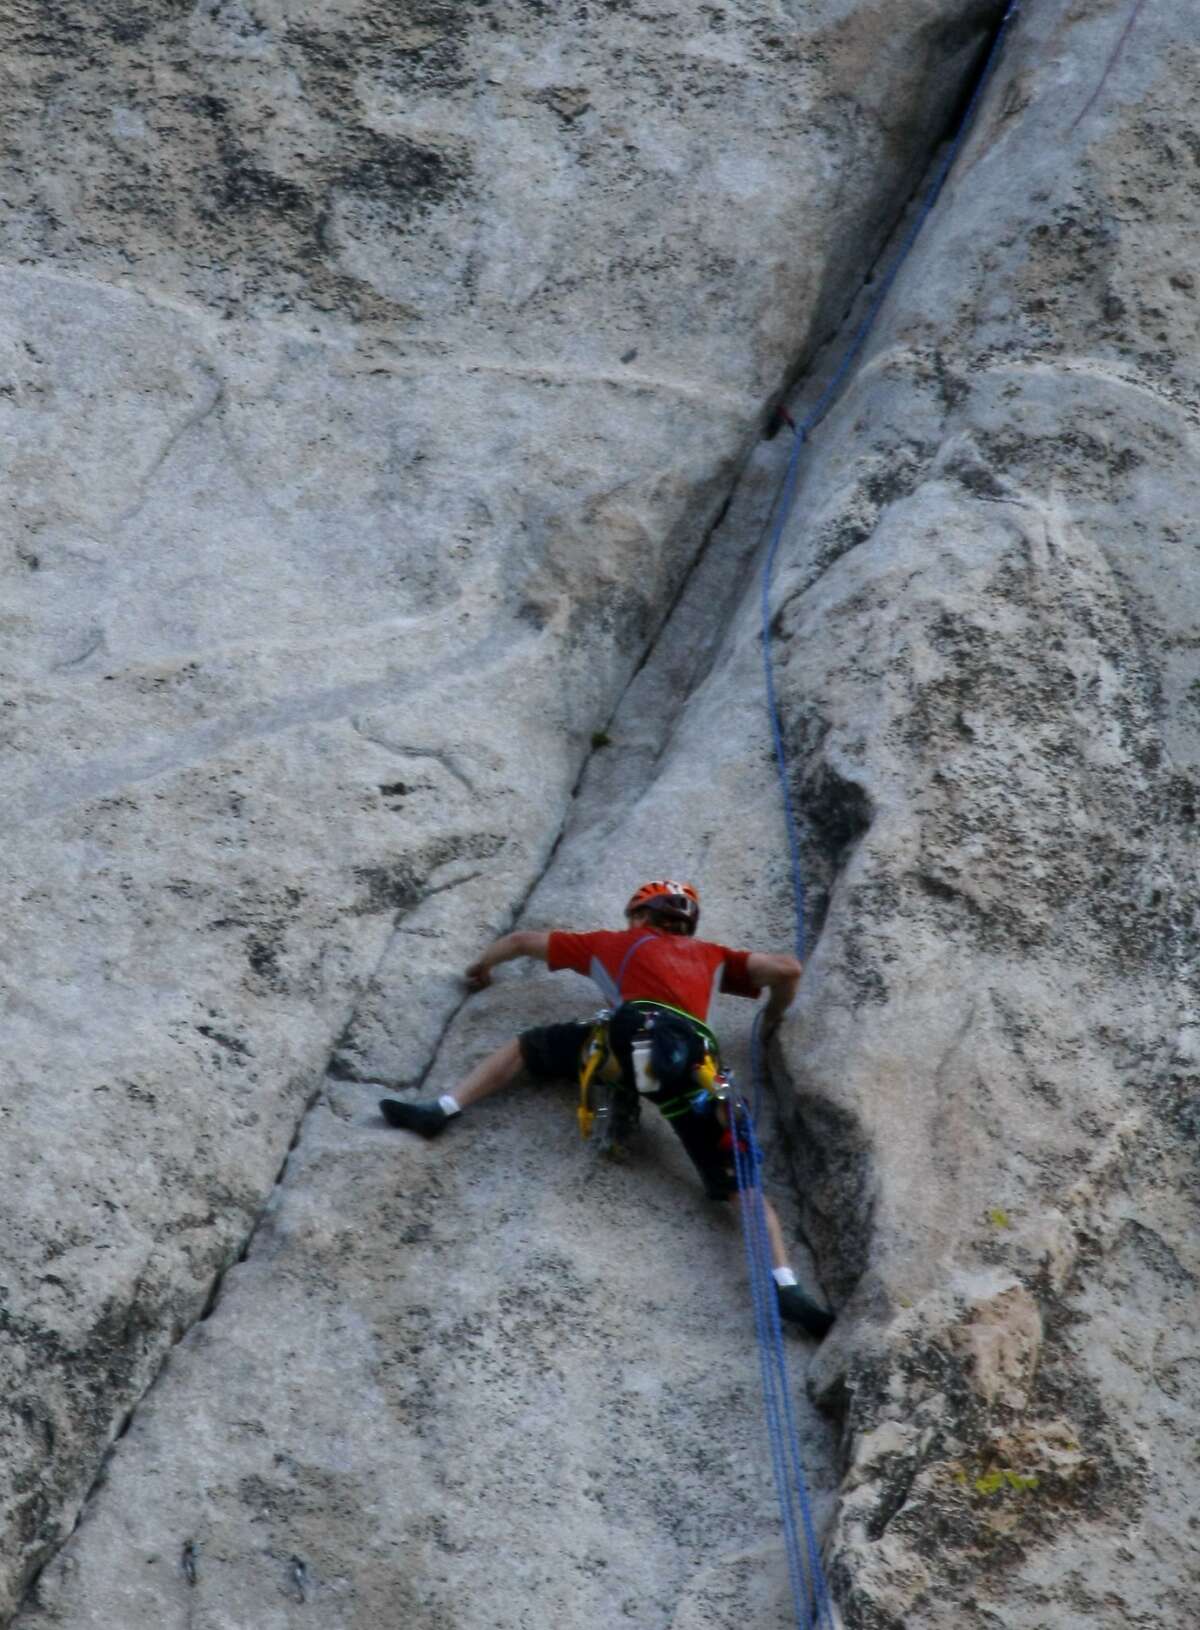 Hans Florine, of Lafayette, Calif., reaches for a hand and foot hold on the Nose route of El Capitan in Yosemite National Park on July 2, 2008. He and his climbing partner Yuji Hirayama, of Japan broke the record with a time of 2 hours, 43 minutes and 33 seconds, beating the previous record of 2 hours and 45 minutes set by German brothers Thomas and Alexander Huber last October. Photo by Michael Maloney / The Chronicle